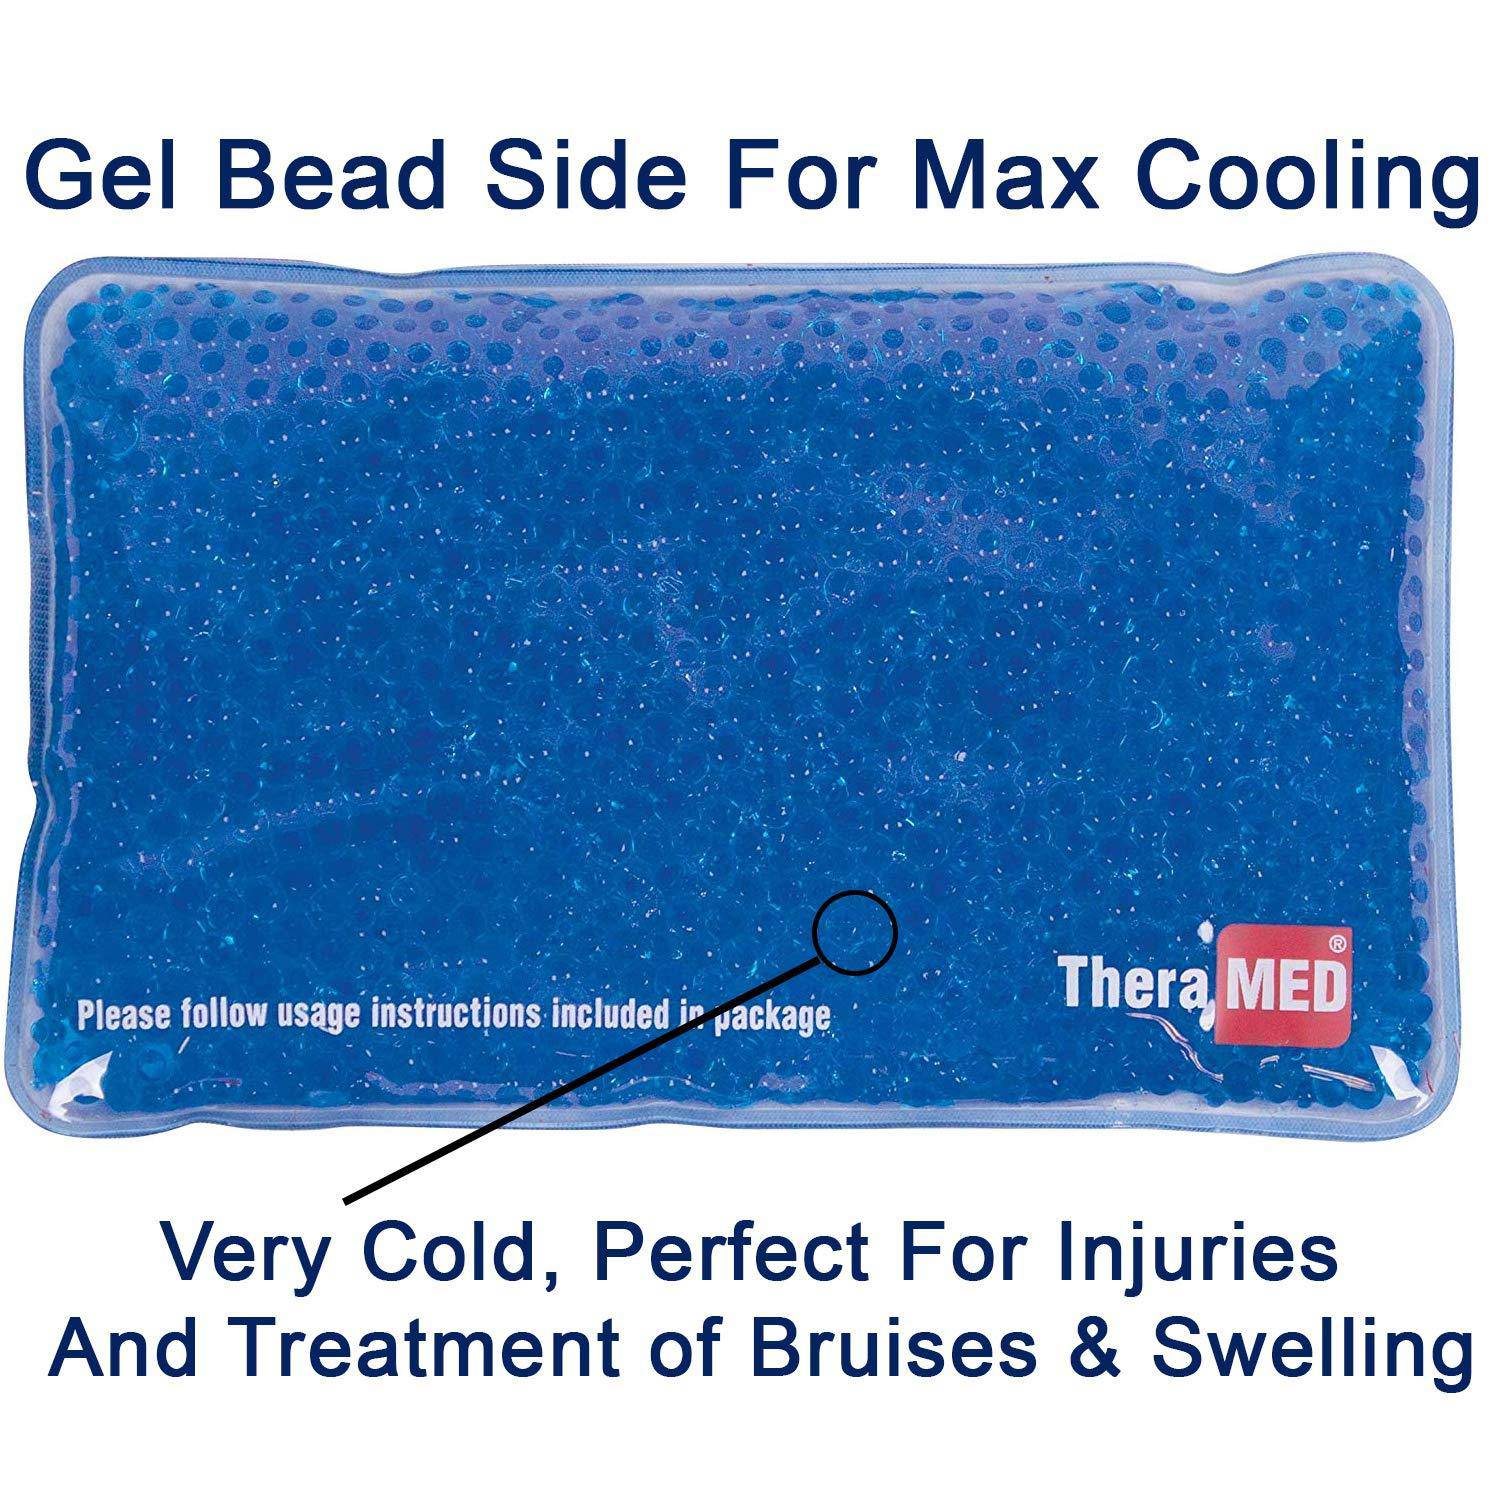 TheraMed IcyCold Gel Bead Sports Pack - Carex Health Brands